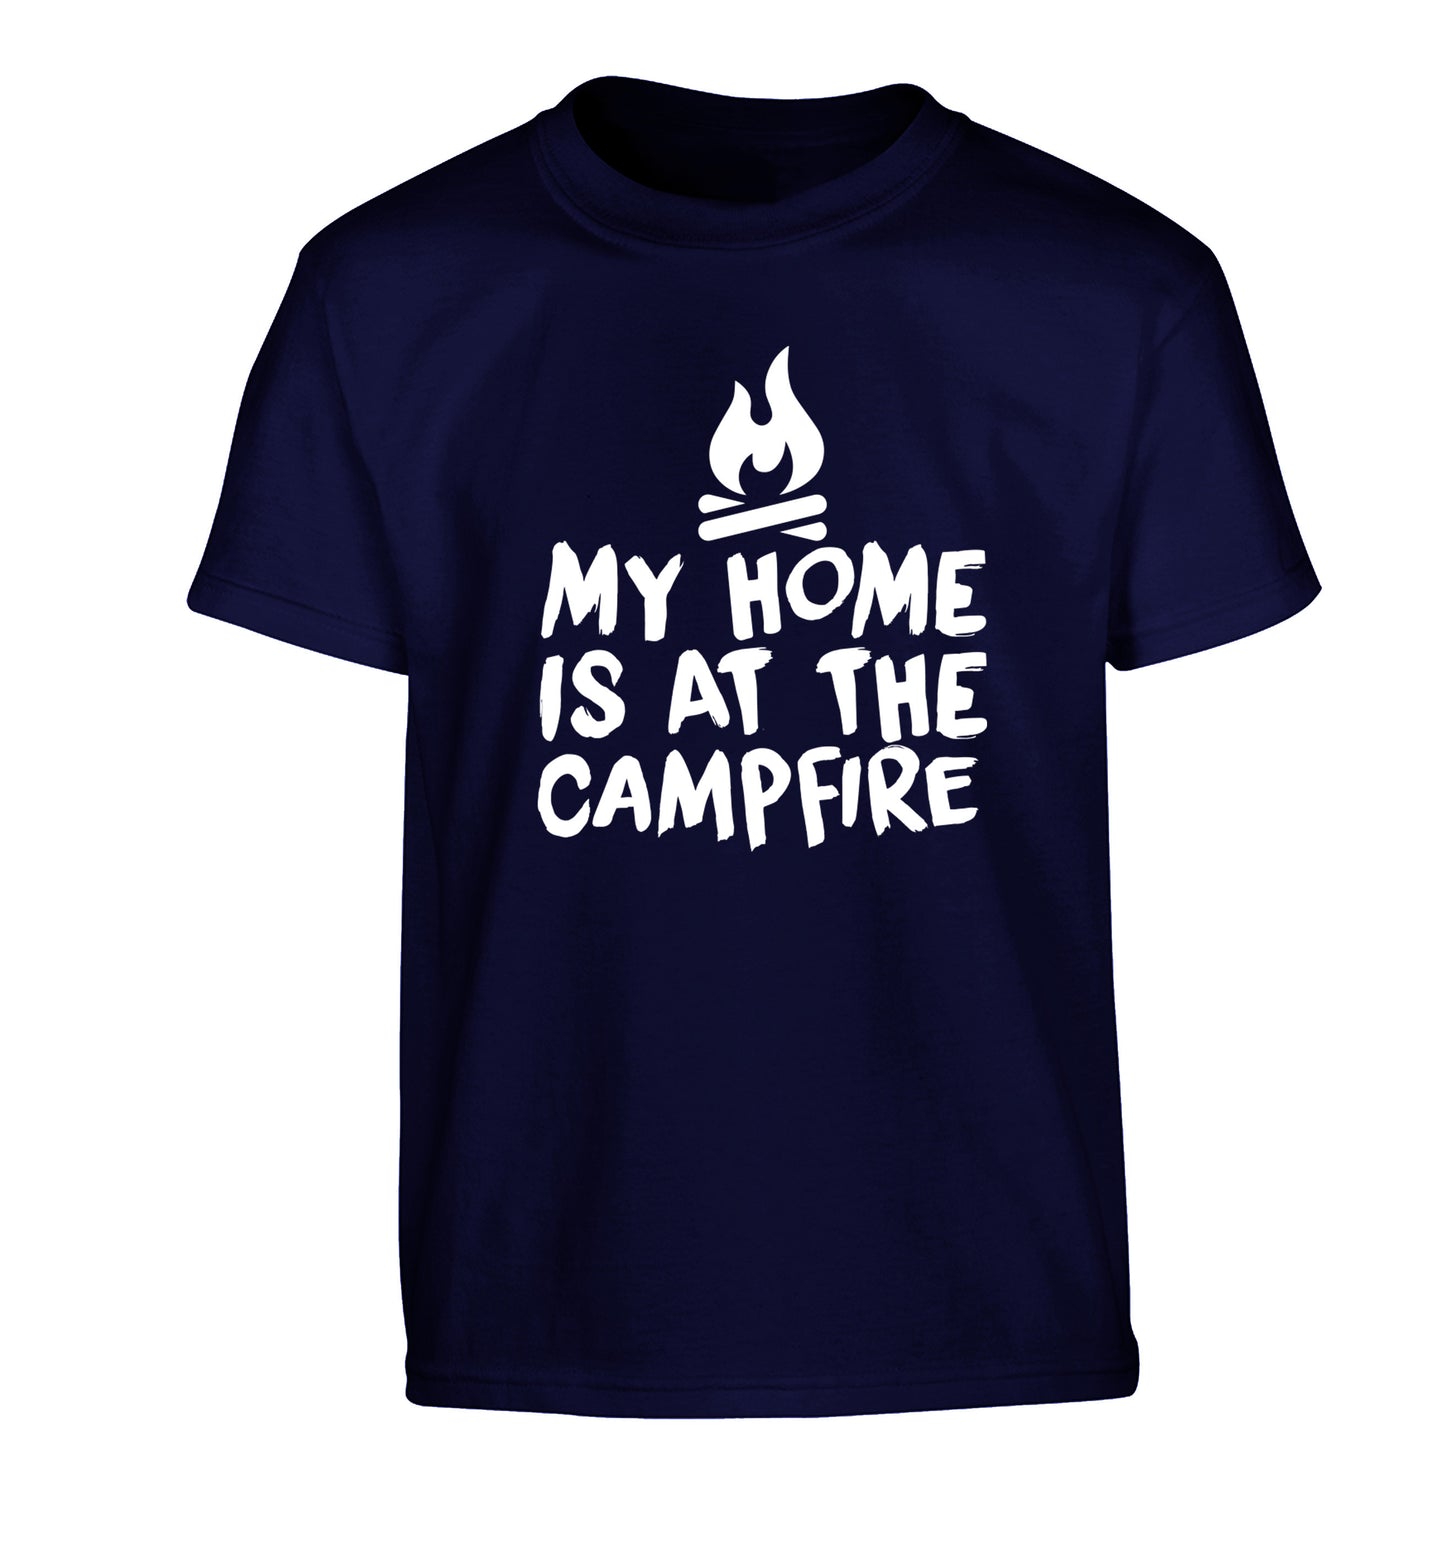 My home is at the campfire Children's navy Tshirt 12-14 Years